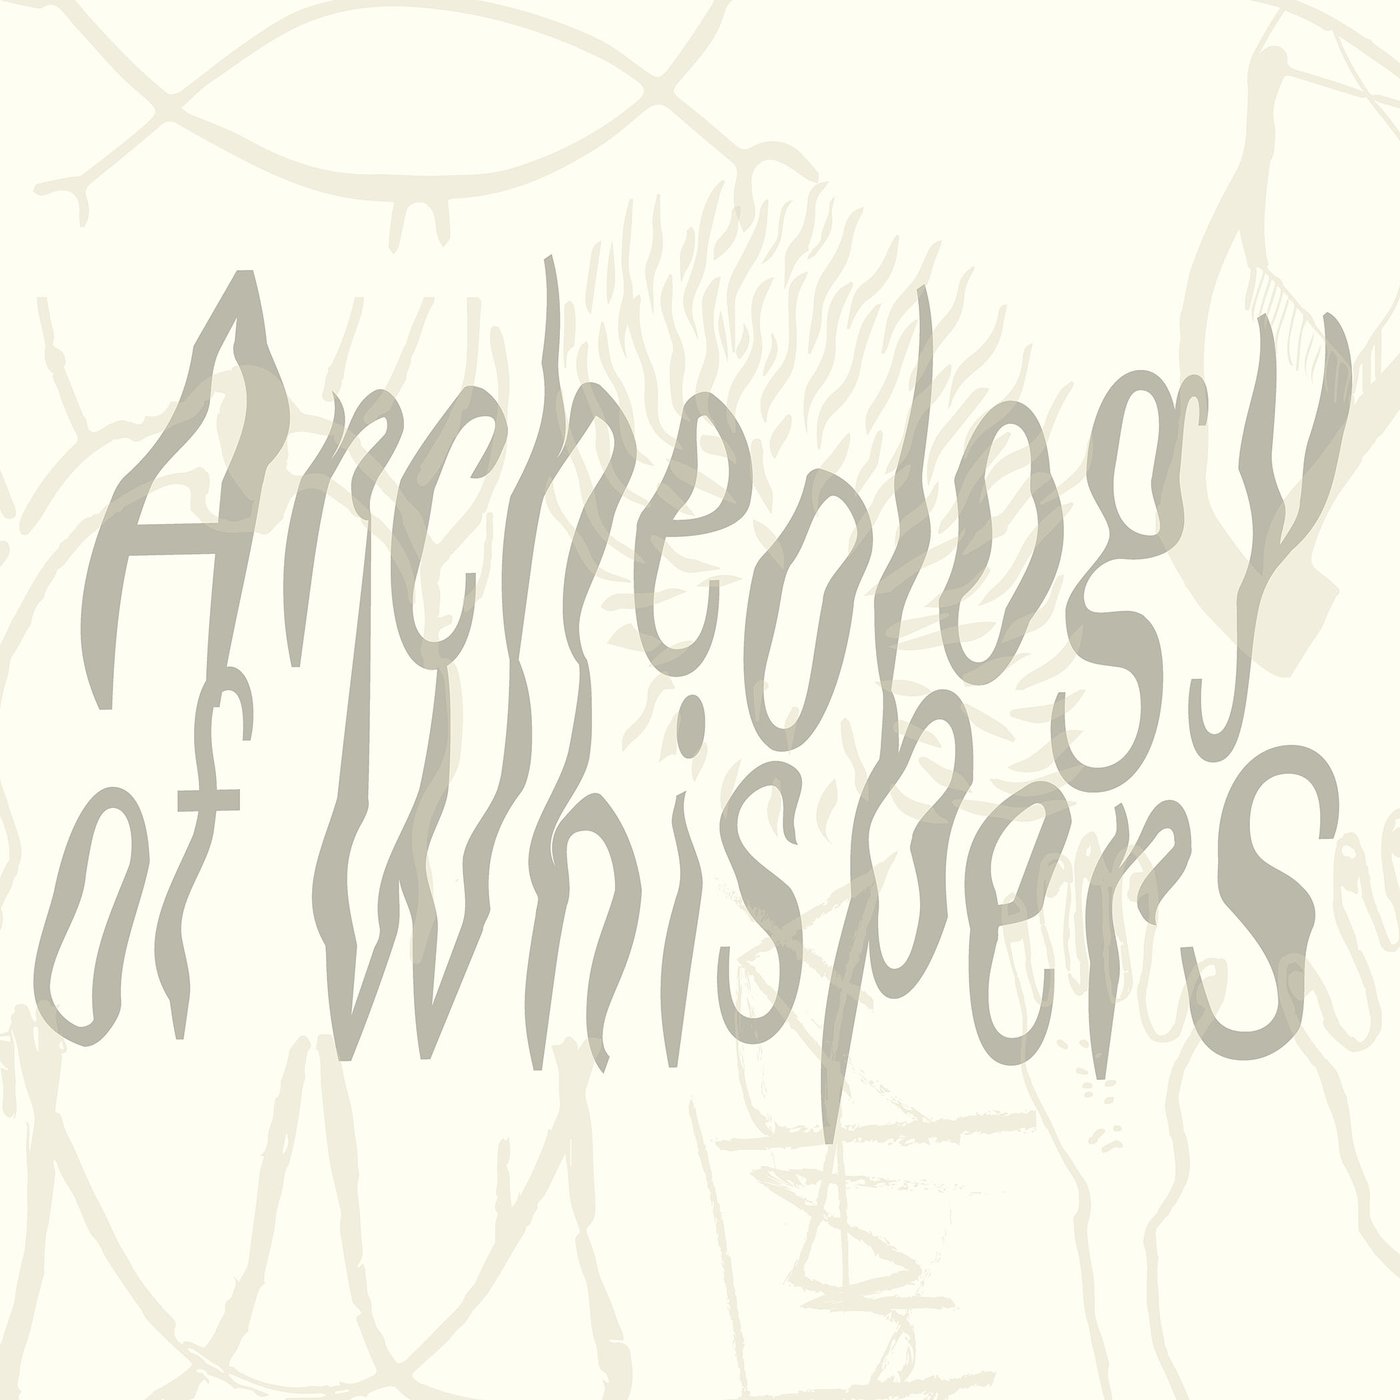 Lettering "Archeology of Whispers" in a slightly distorted font. Drawing elements can be seen in the background.